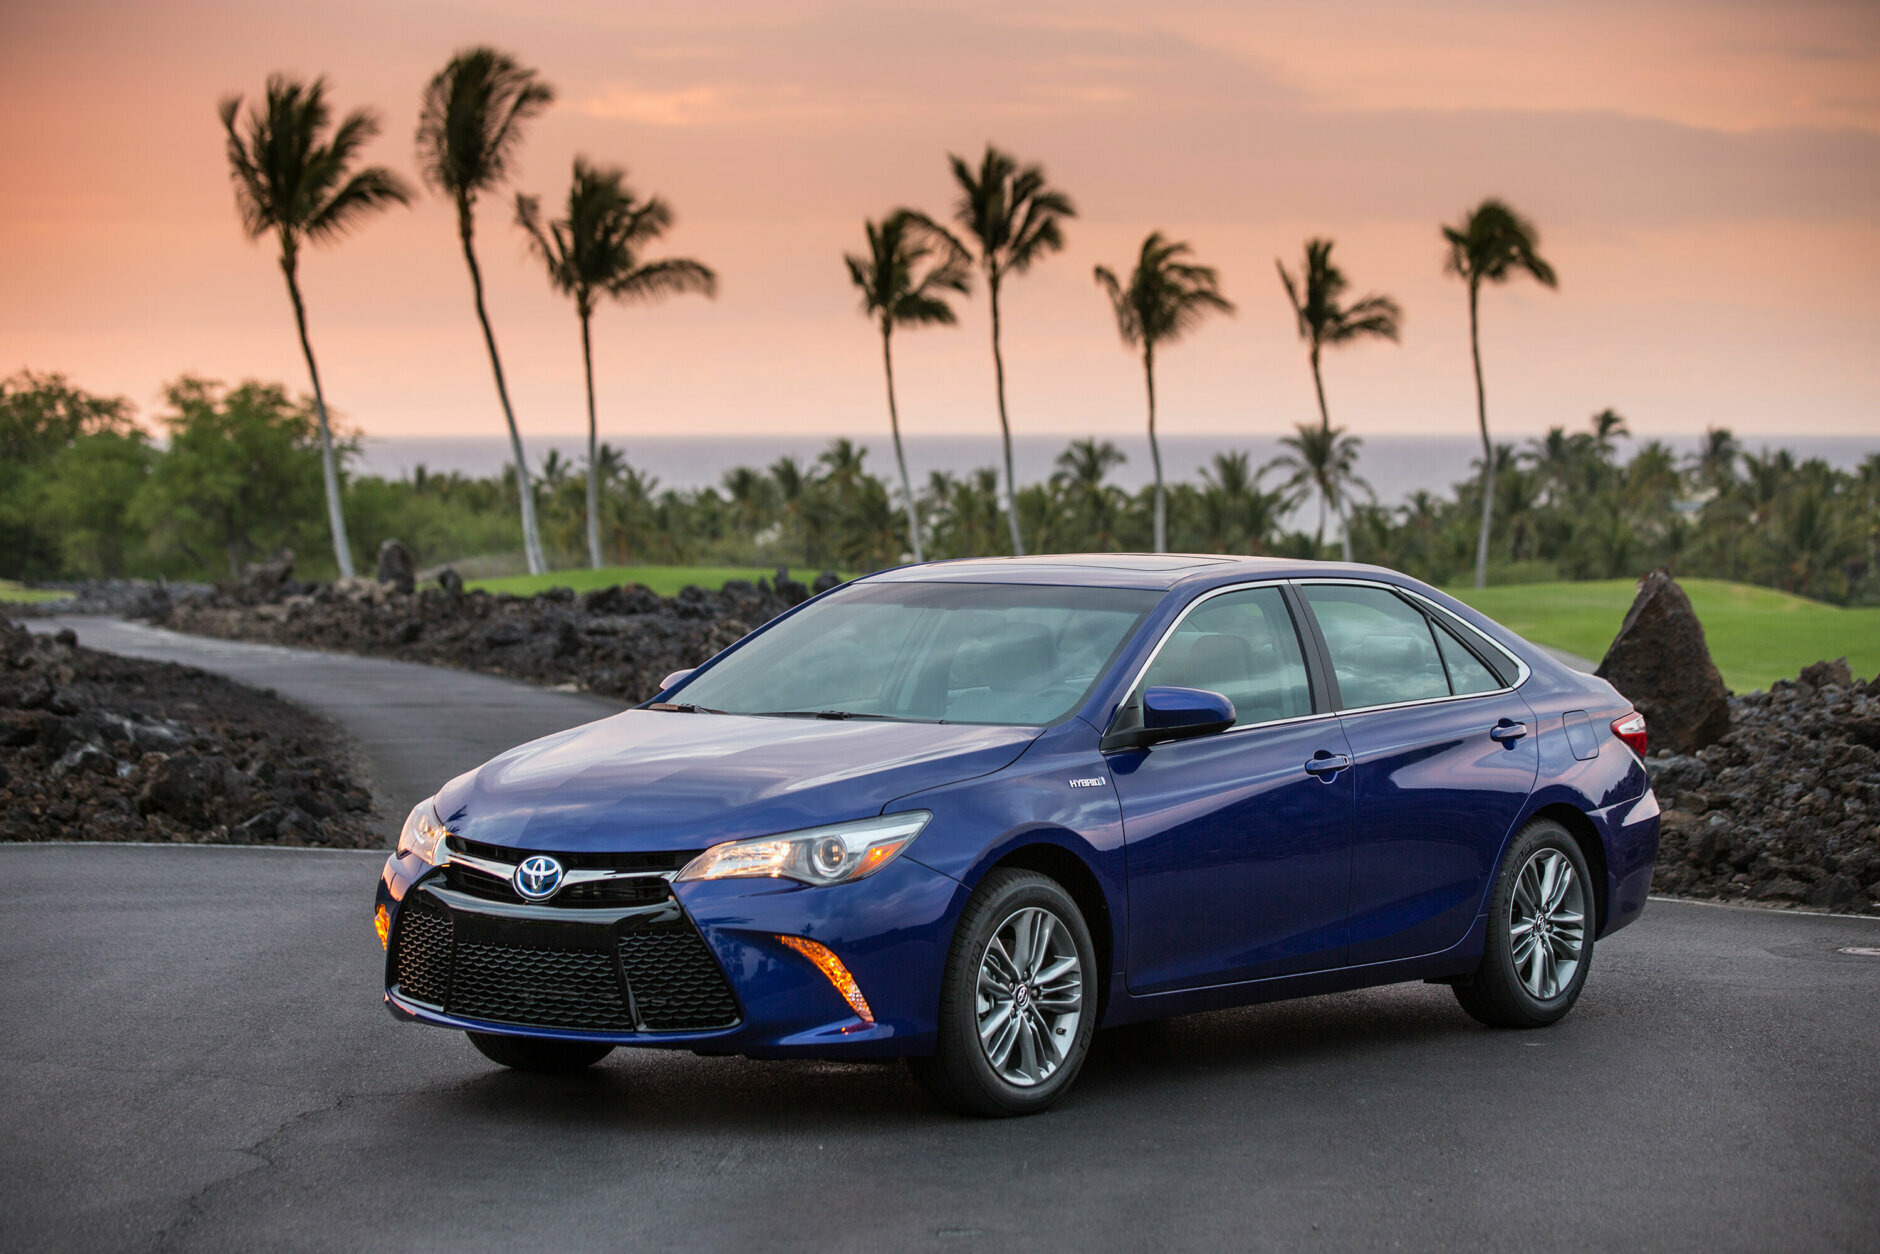 <p><strong>Best used mid-size car for teens:</strong> The 2016 Toyota Camry and Camry Hybrid</p>
